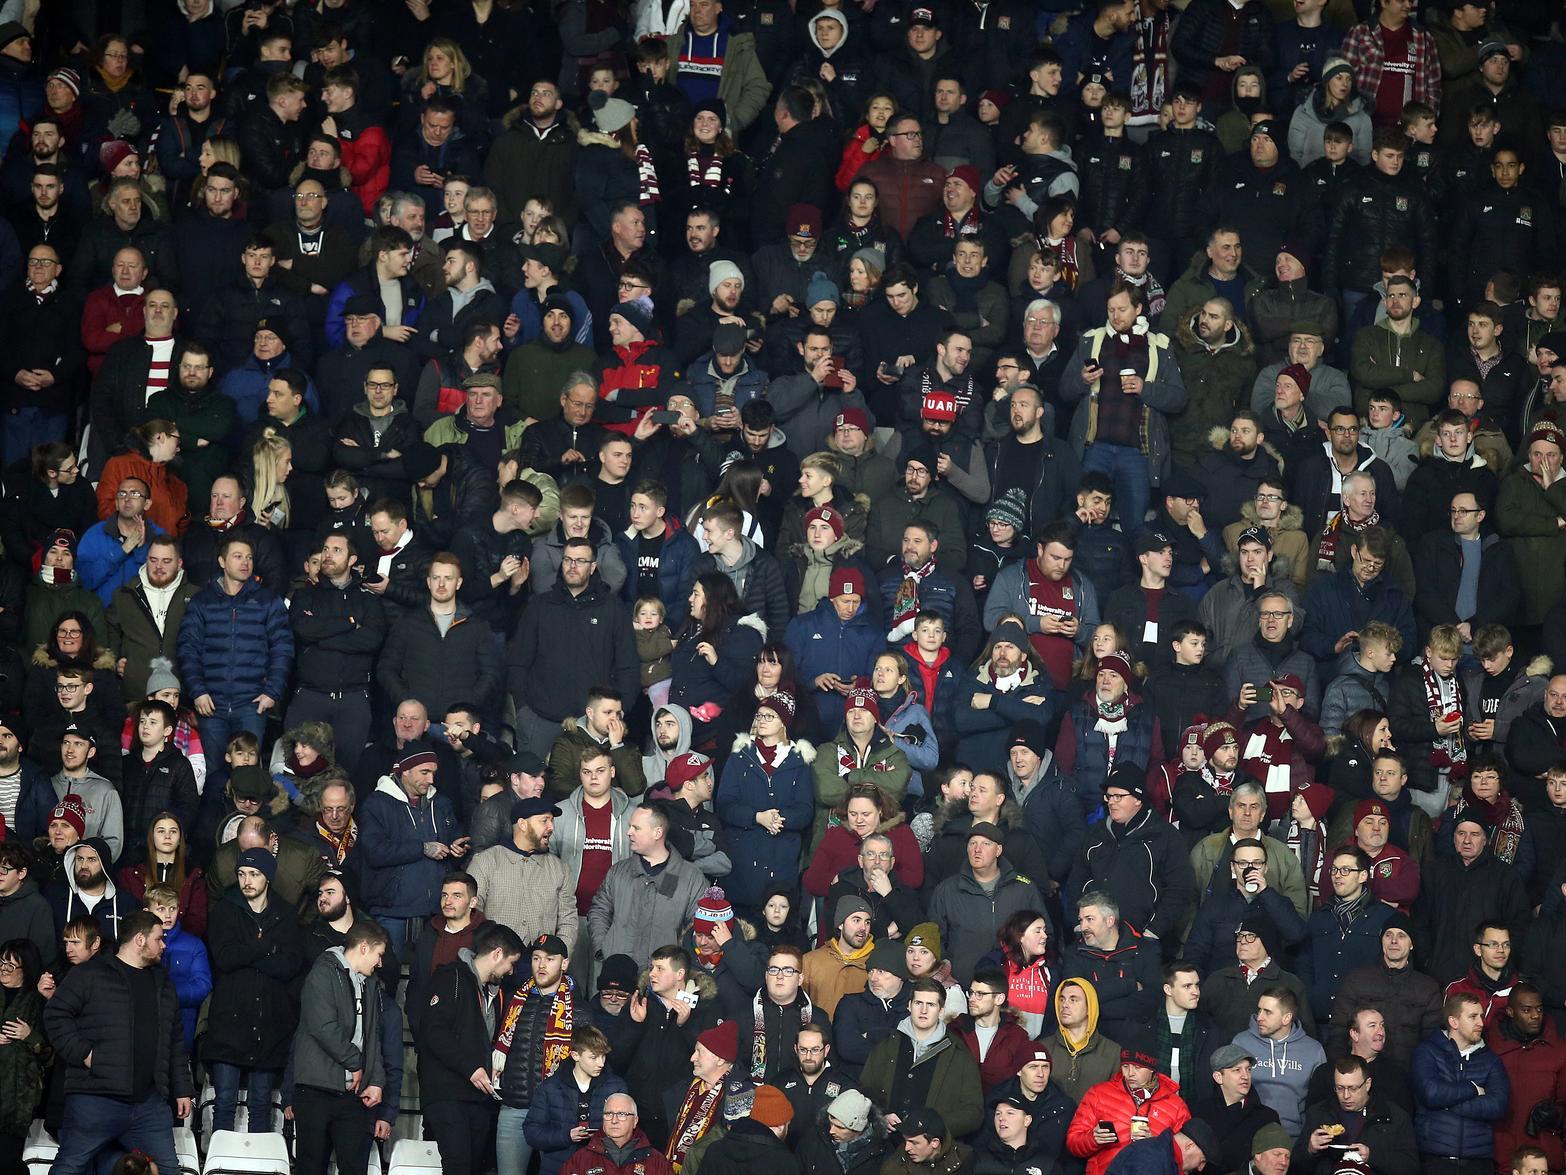 A total of 4,442 Cobblers fans made the trip to Derby